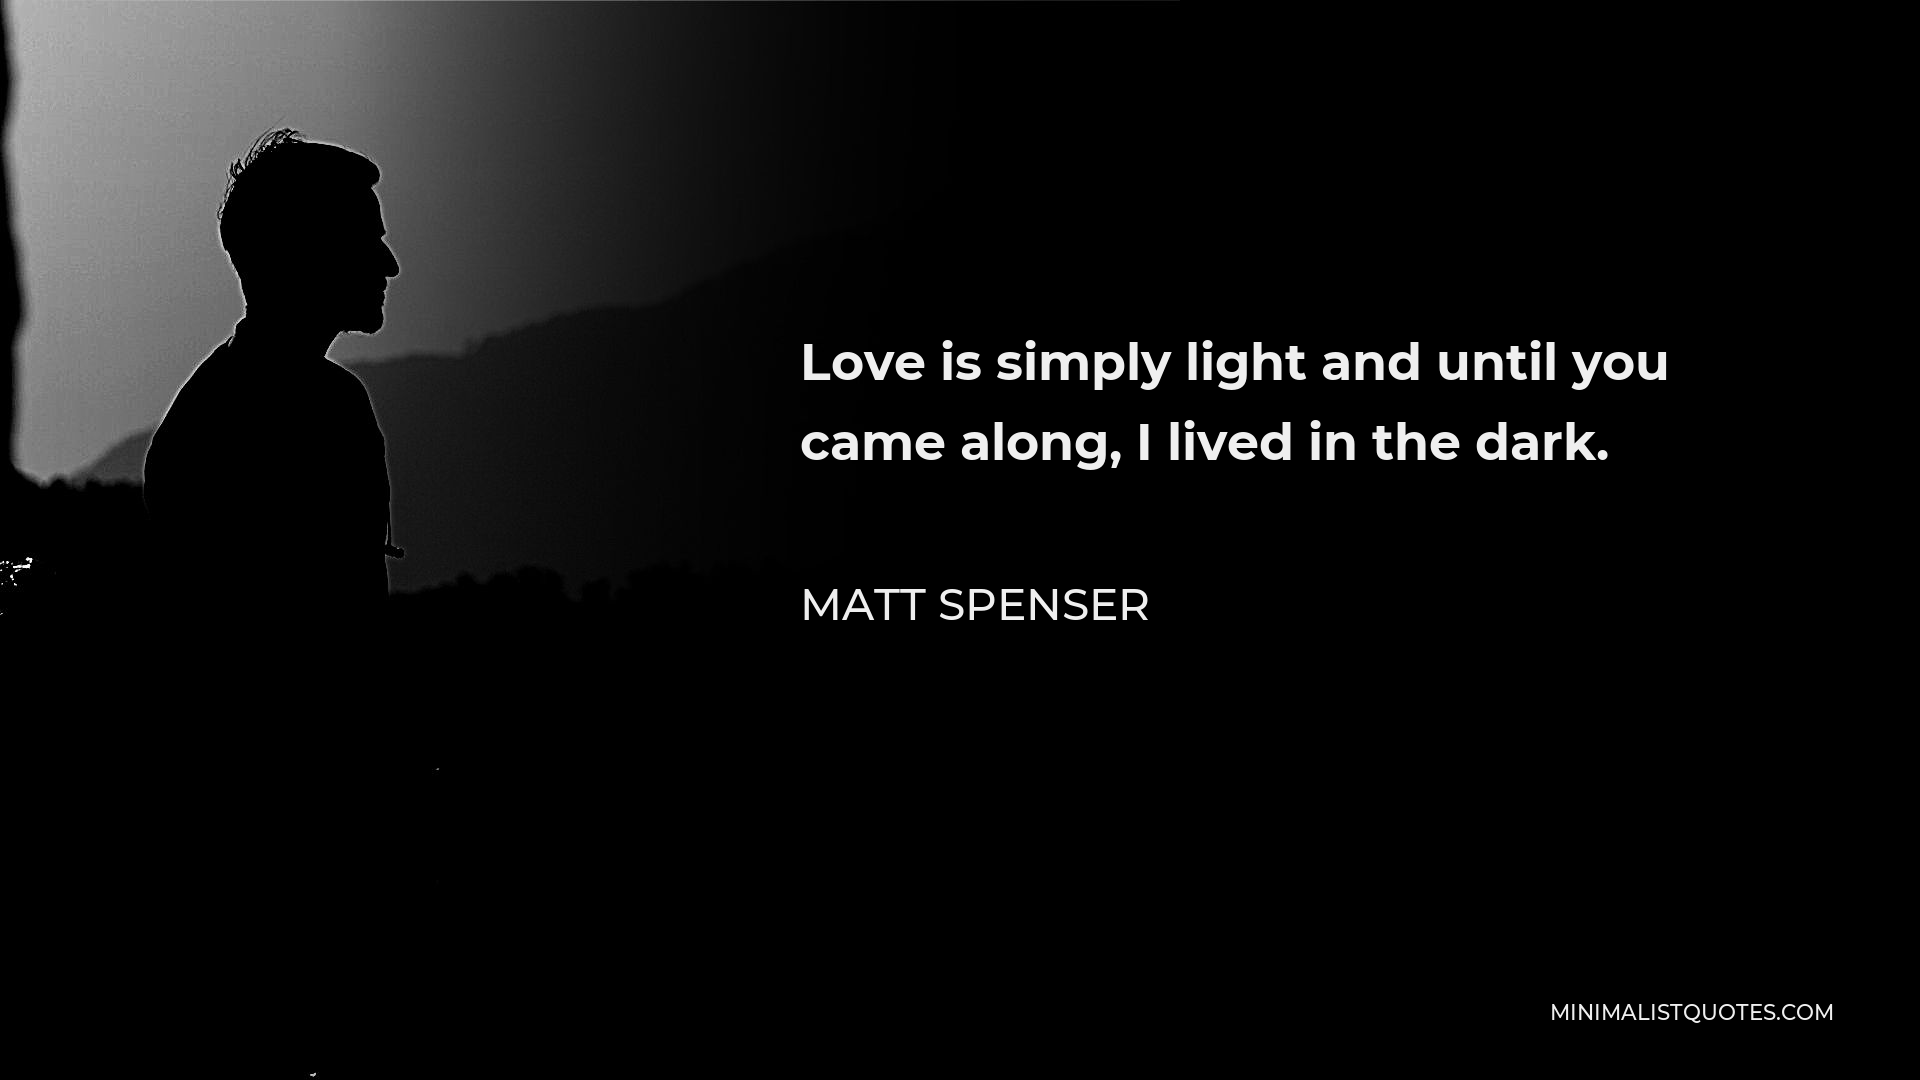 Matt Spenser Quote - Love is simply light and until you came along, I lived in the dark.